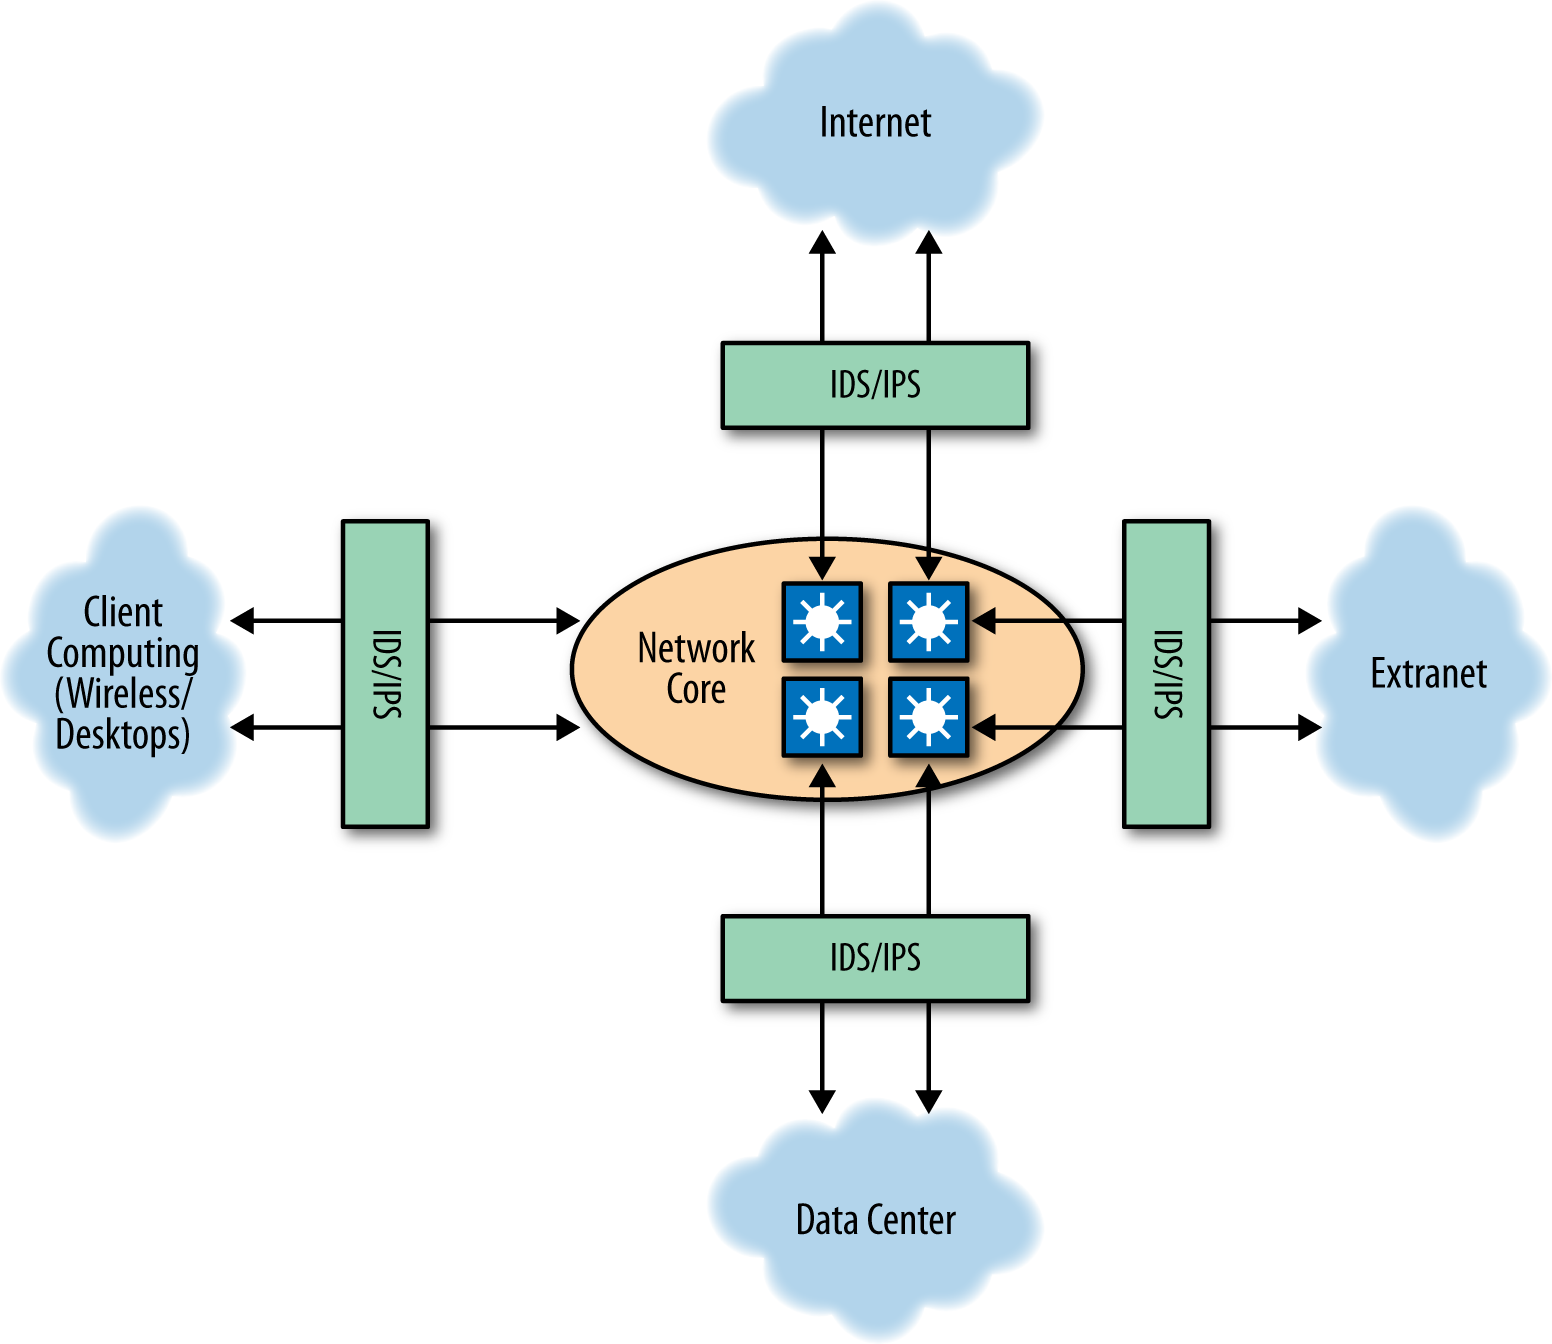 An example of an effective IDS or IPS architecture